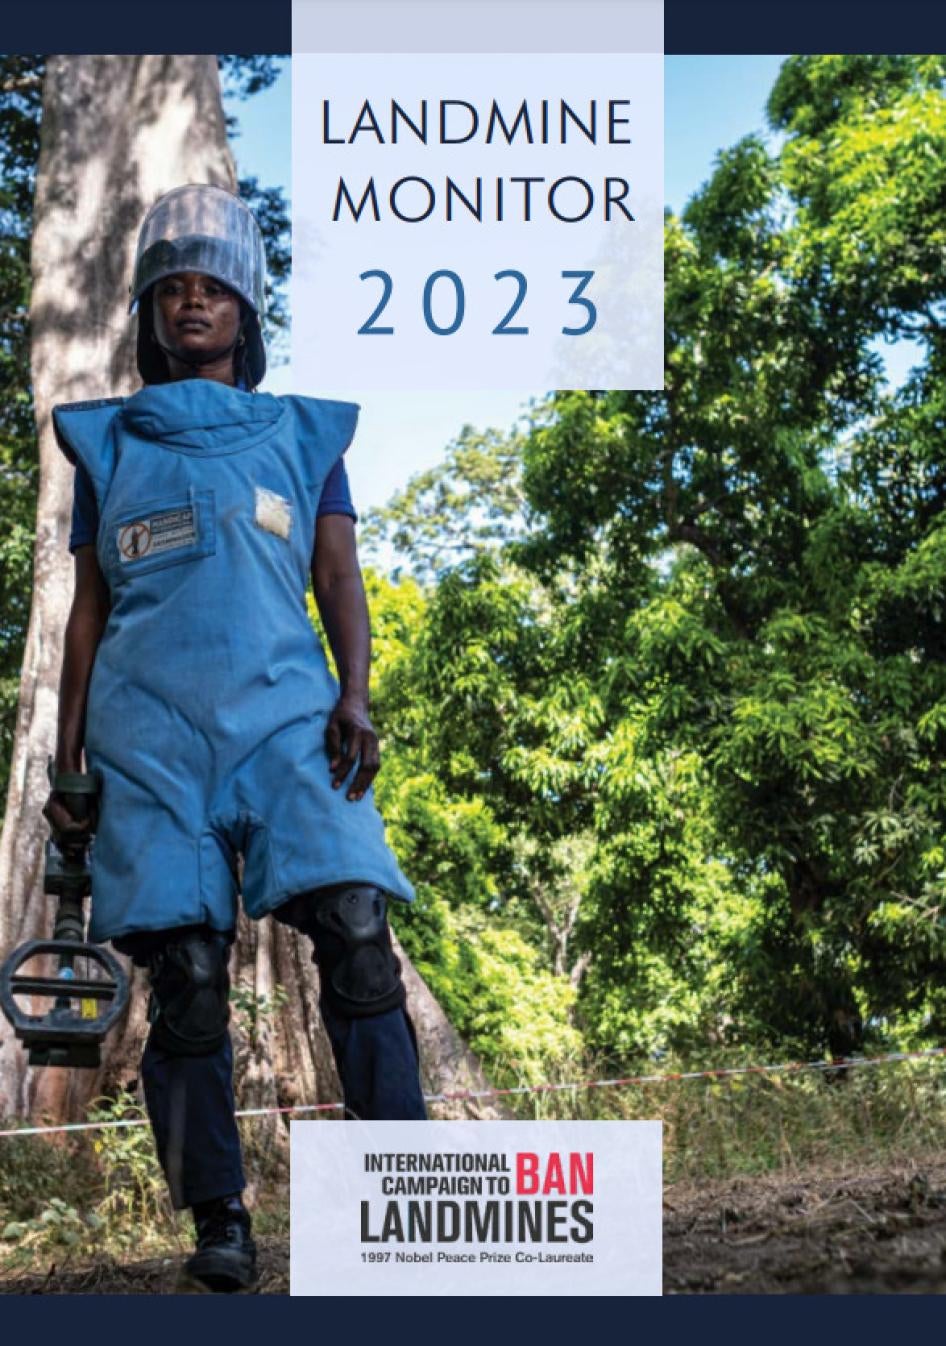 This year's Landmine Monitor 2023 cover depicting a deminer working in the Ziguinchor region in Casamance, Senegal.